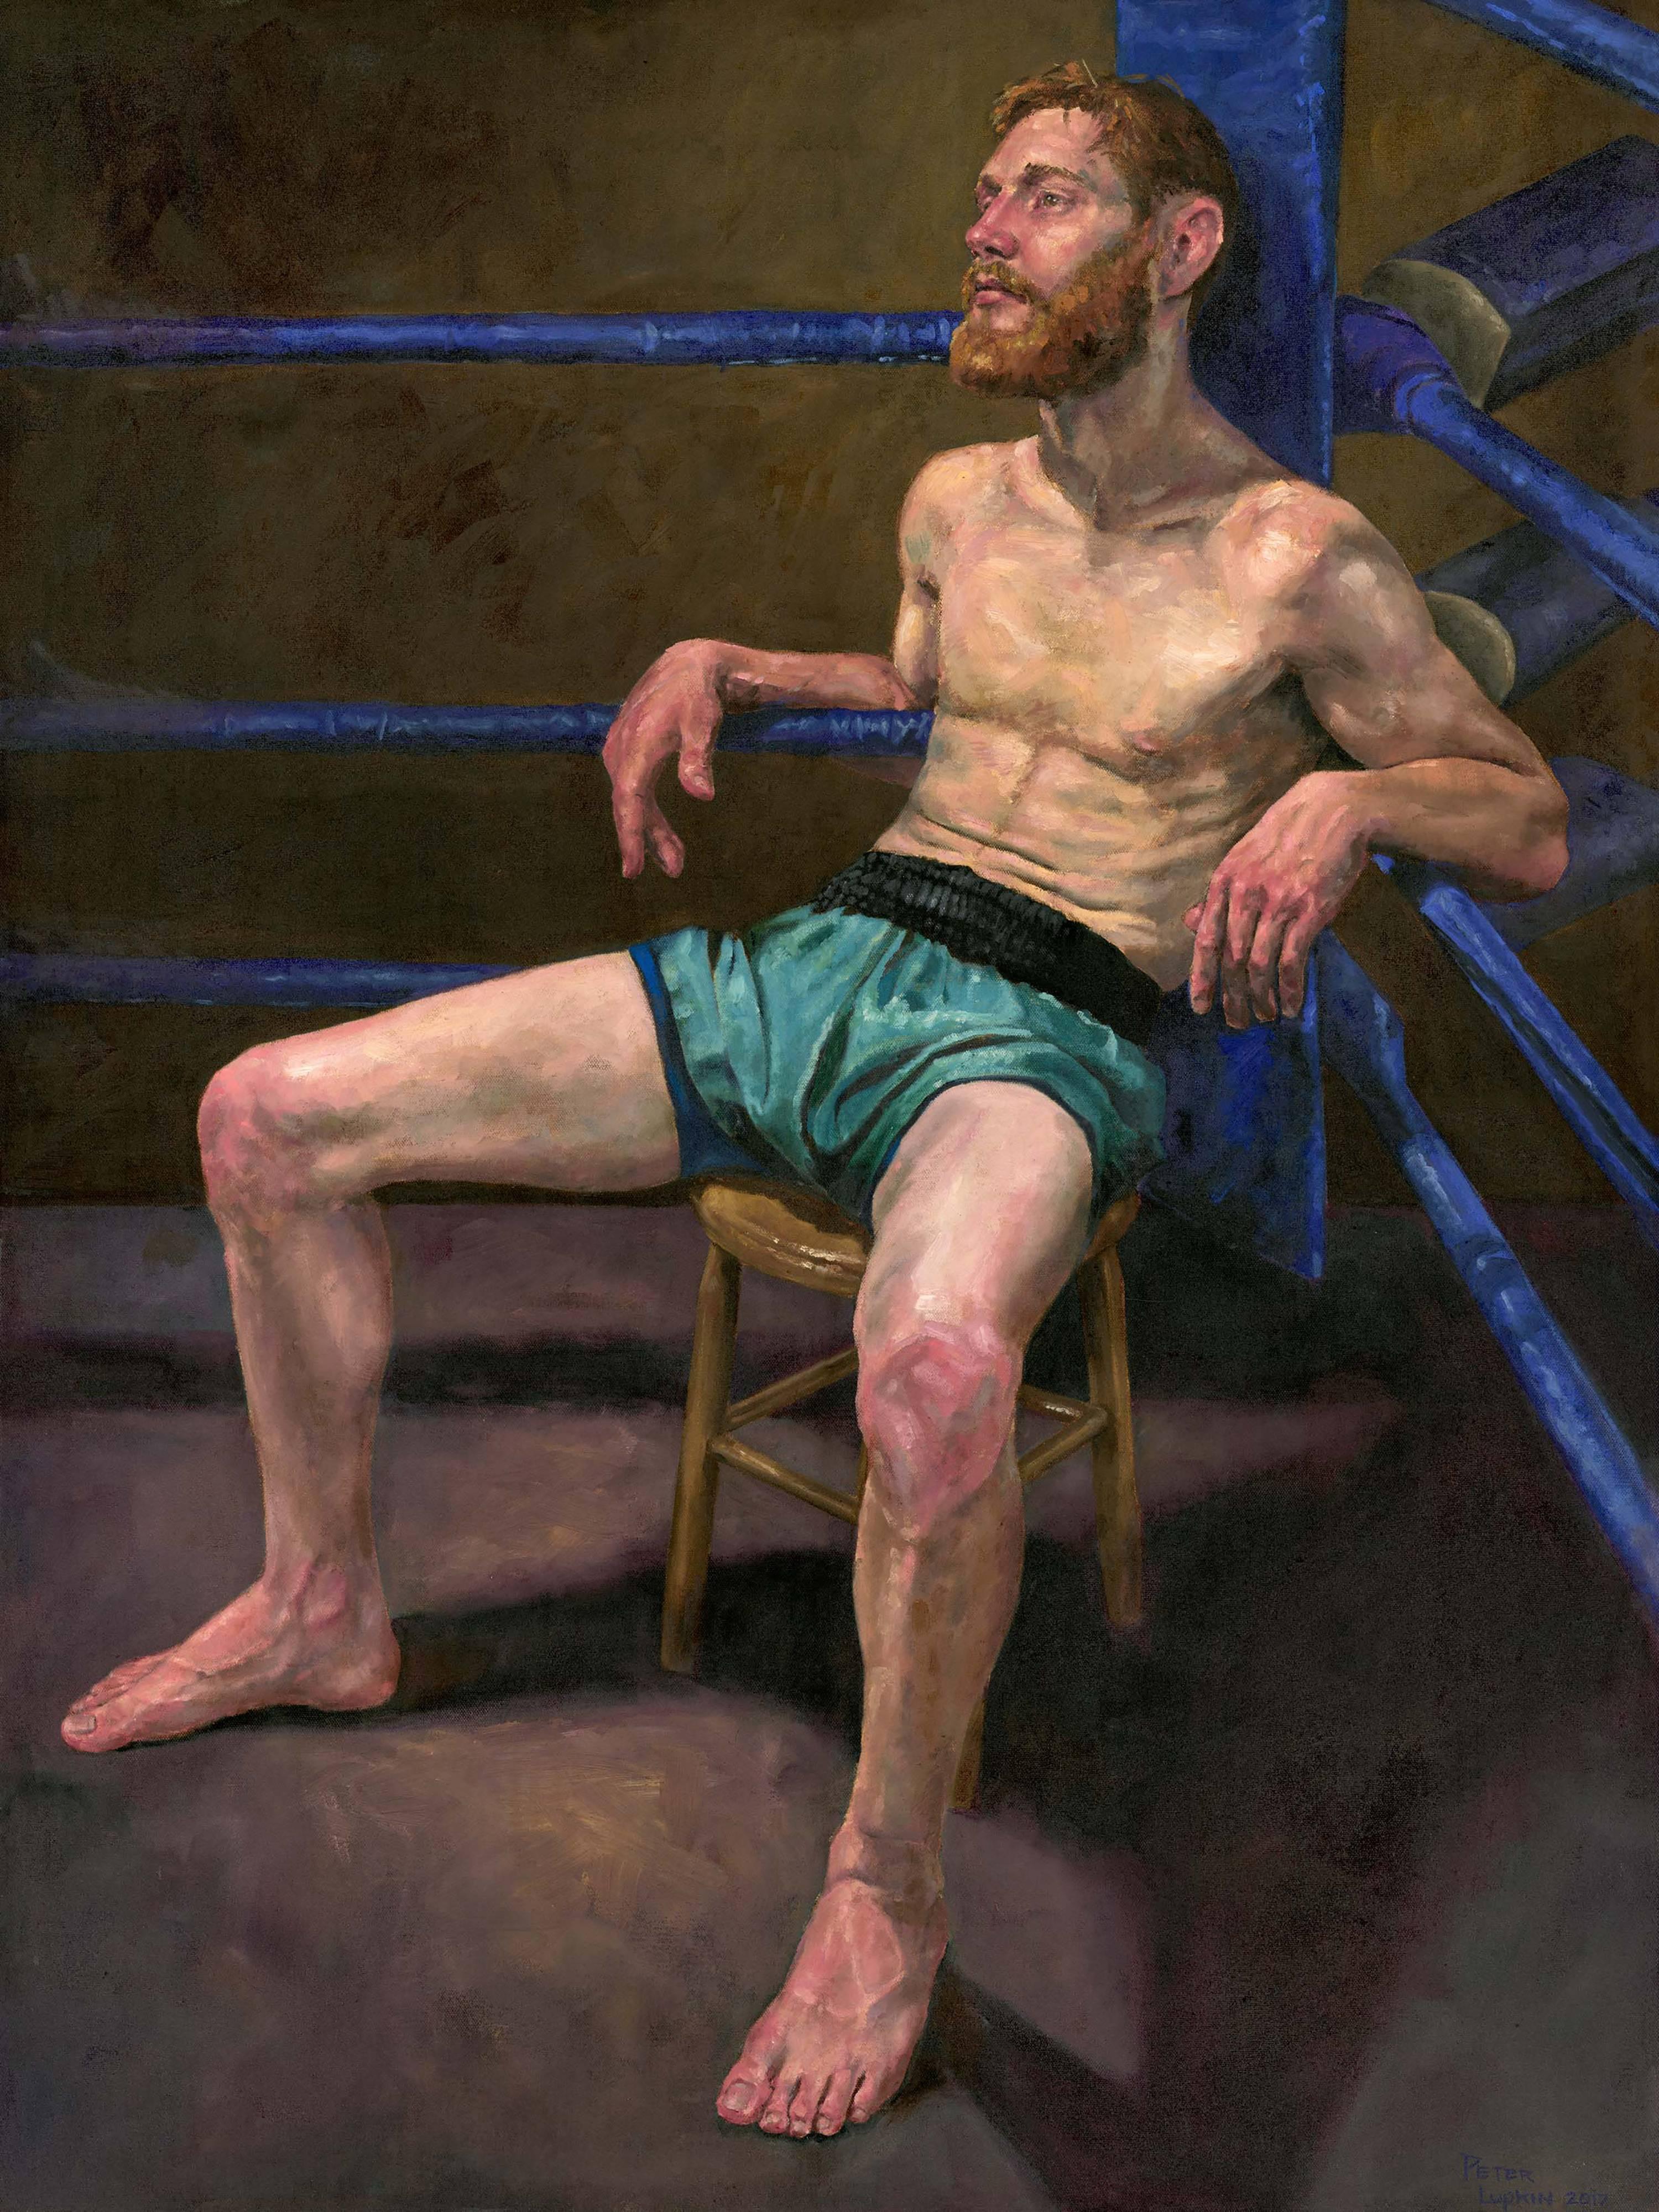 Pyrrhus - Original Oil Painting of a Fighter in Shorts Sitting in the Ring